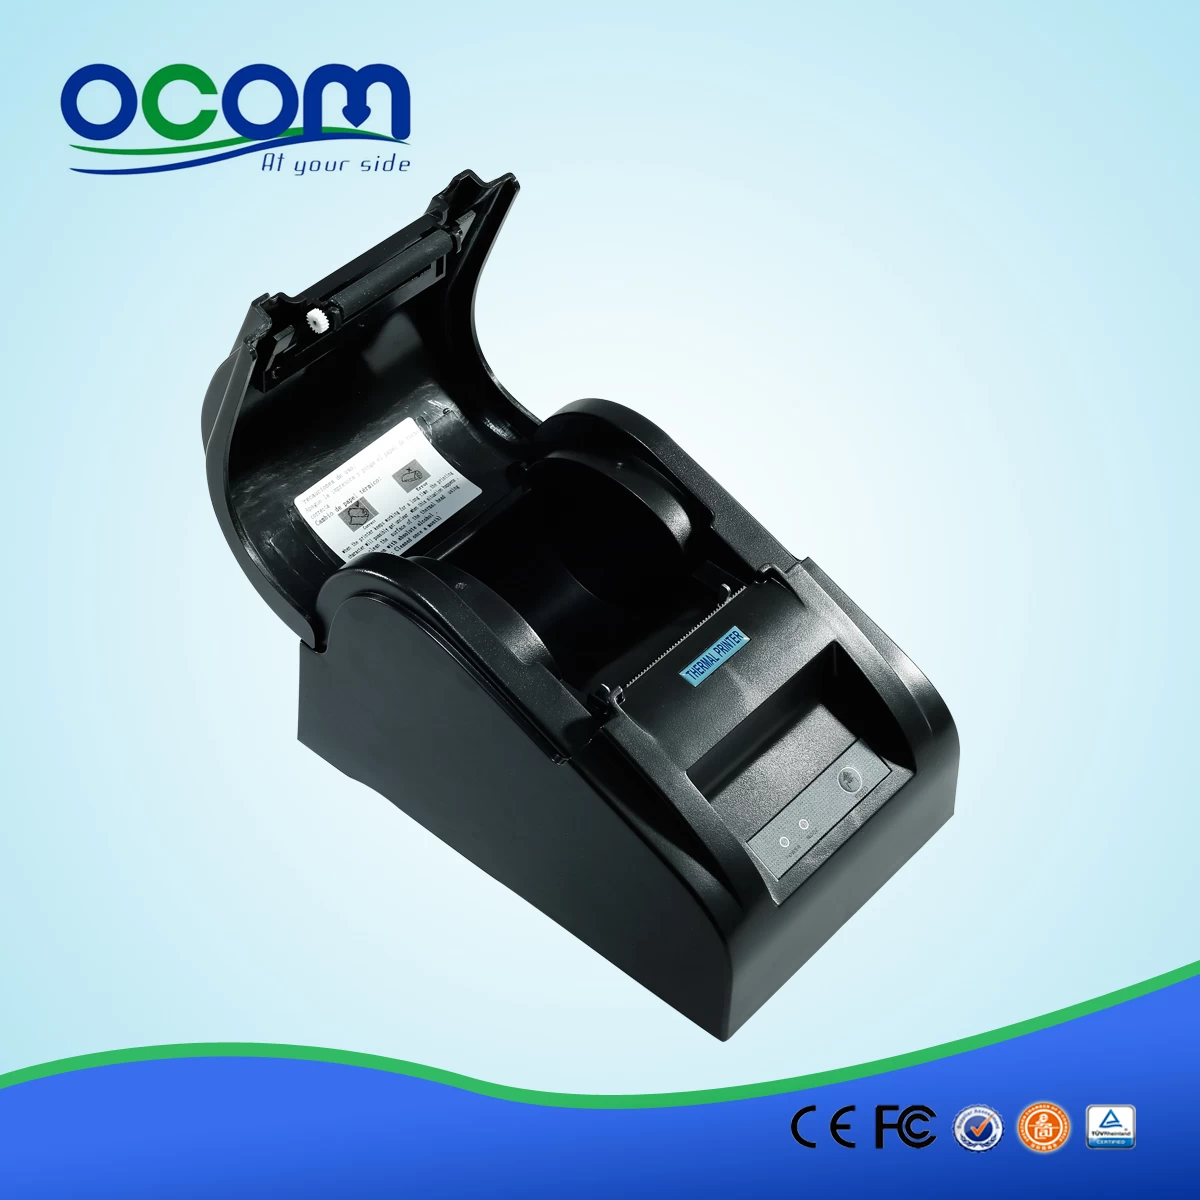 OCPP-585 58mm thermal receipt printer with optional bluetooth